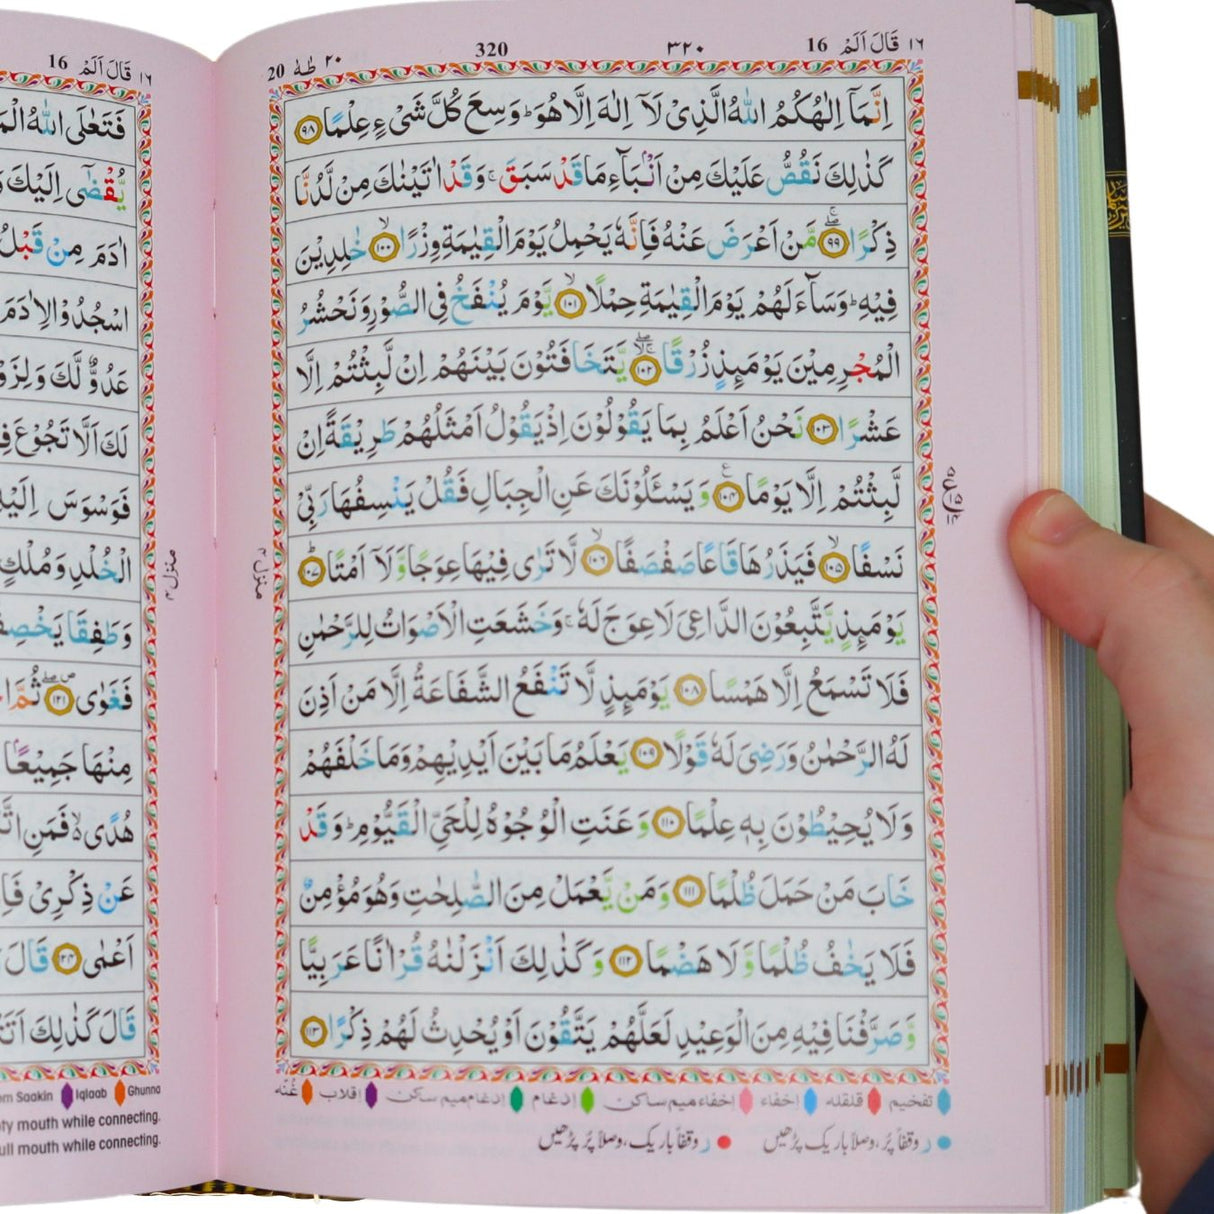 Hafzi Quran with Colour Coded Tajweed Rules (15 Lines) (Indo/Pak) (Kabah Cover)